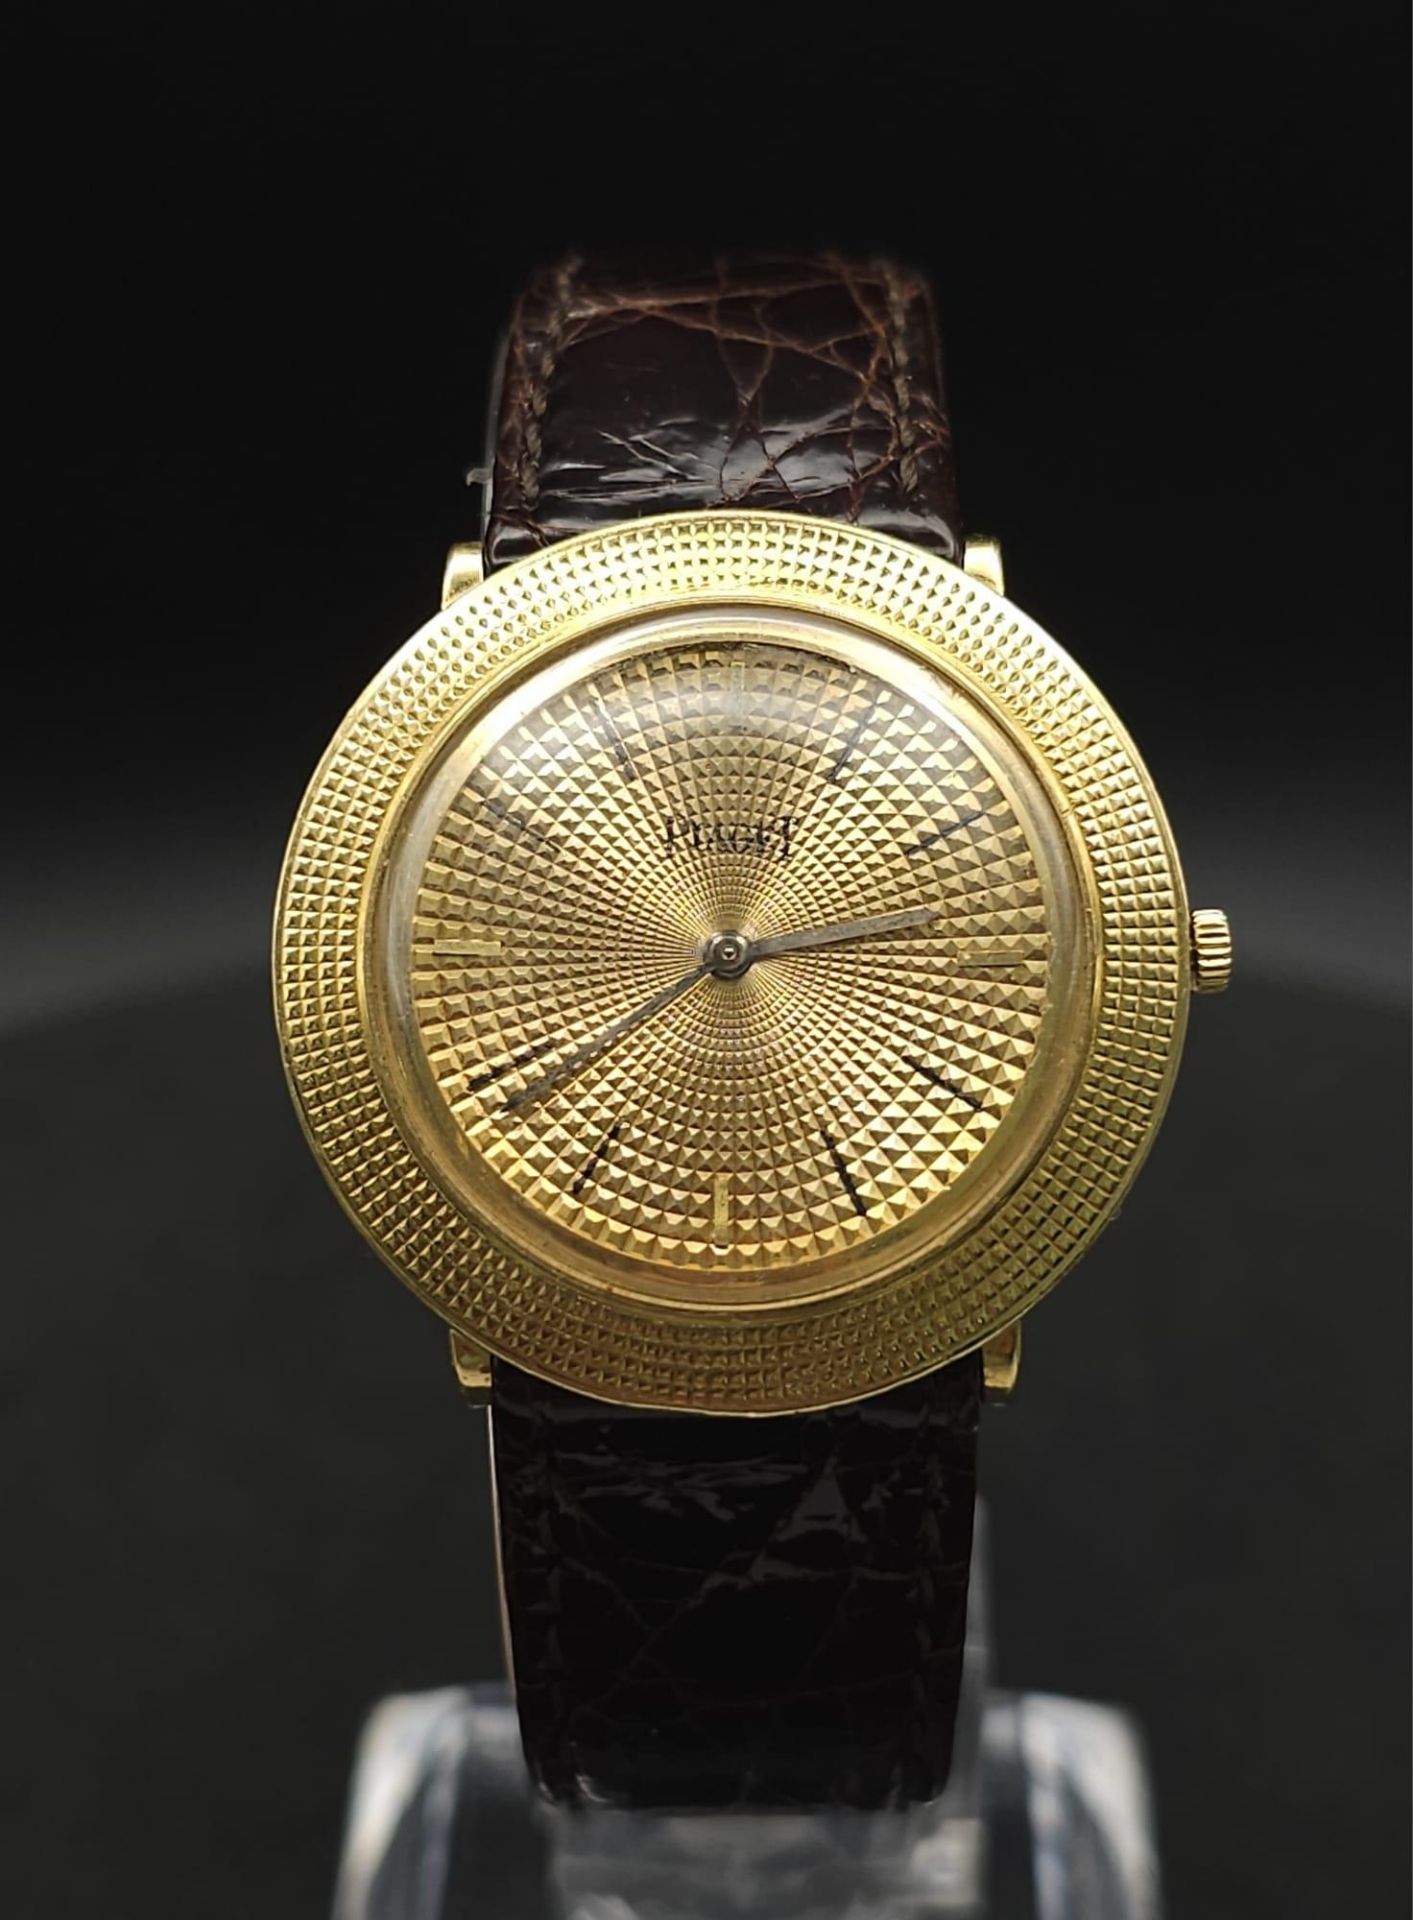 A Vintage 18K Gold Piaget Gents Watch with Hypnotic Dial. Brown crocodile strap. 18k gold case - - Image 4 of 25